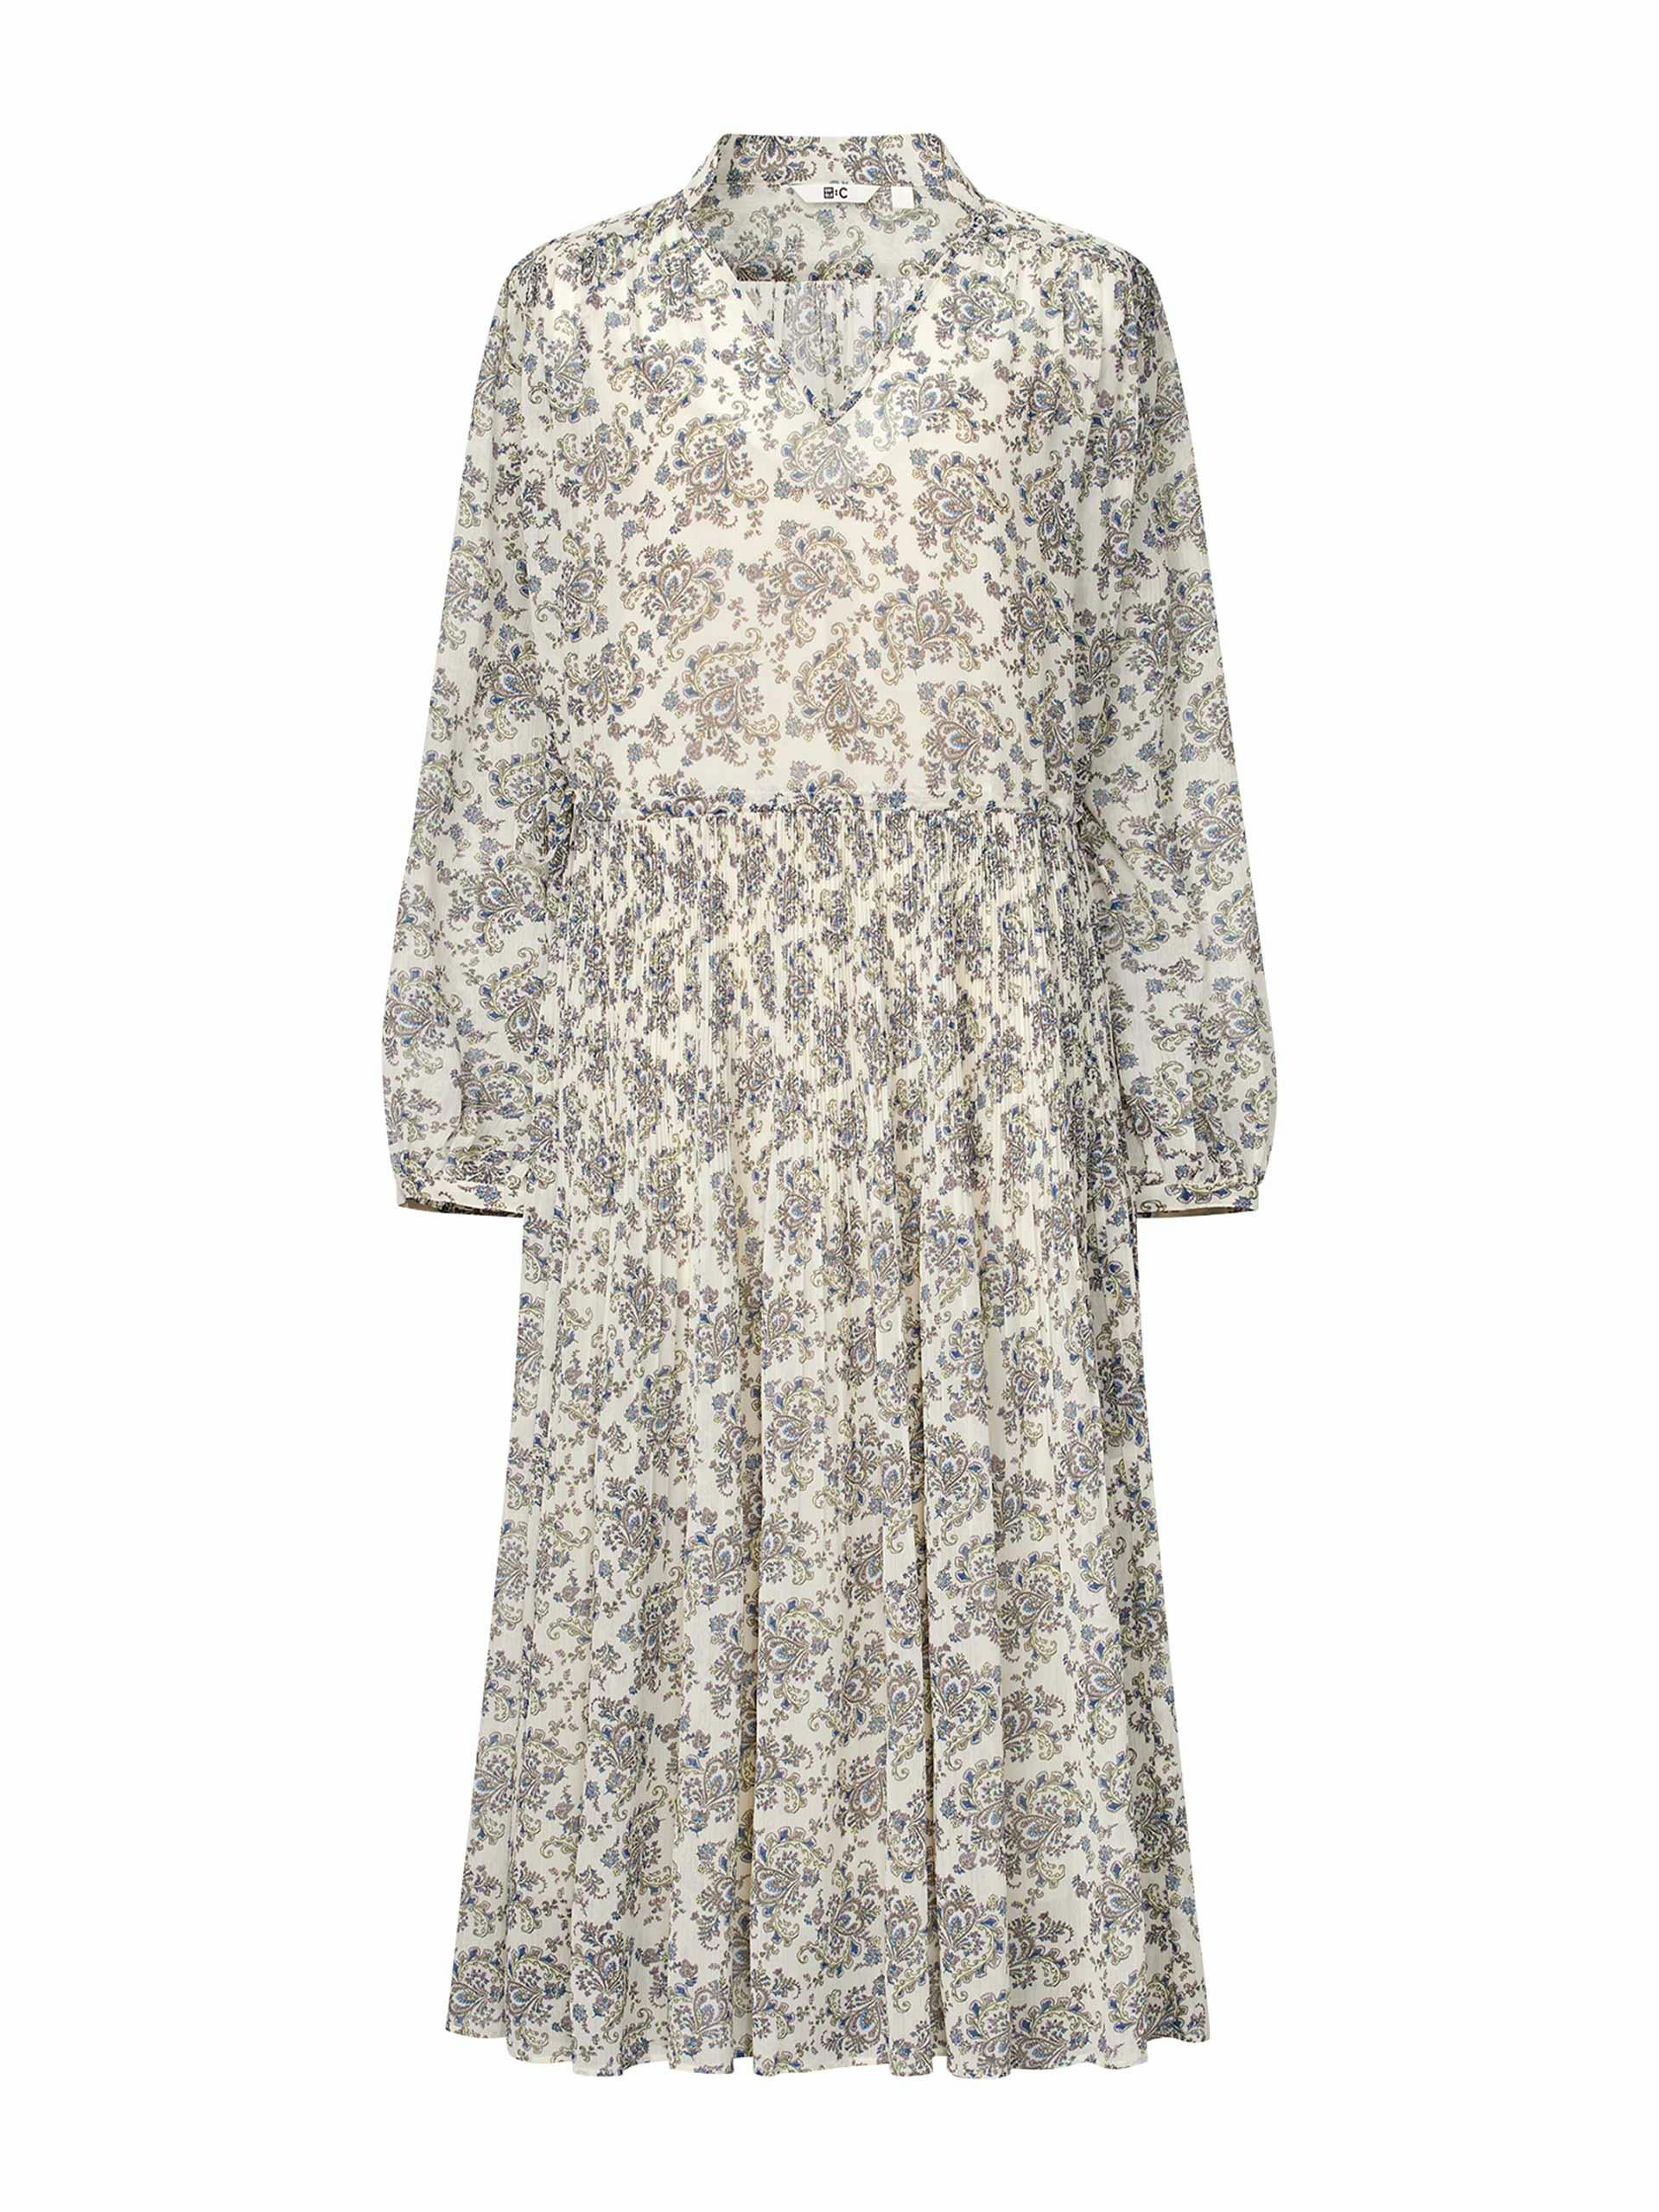 White pleated printed long sleeved dress